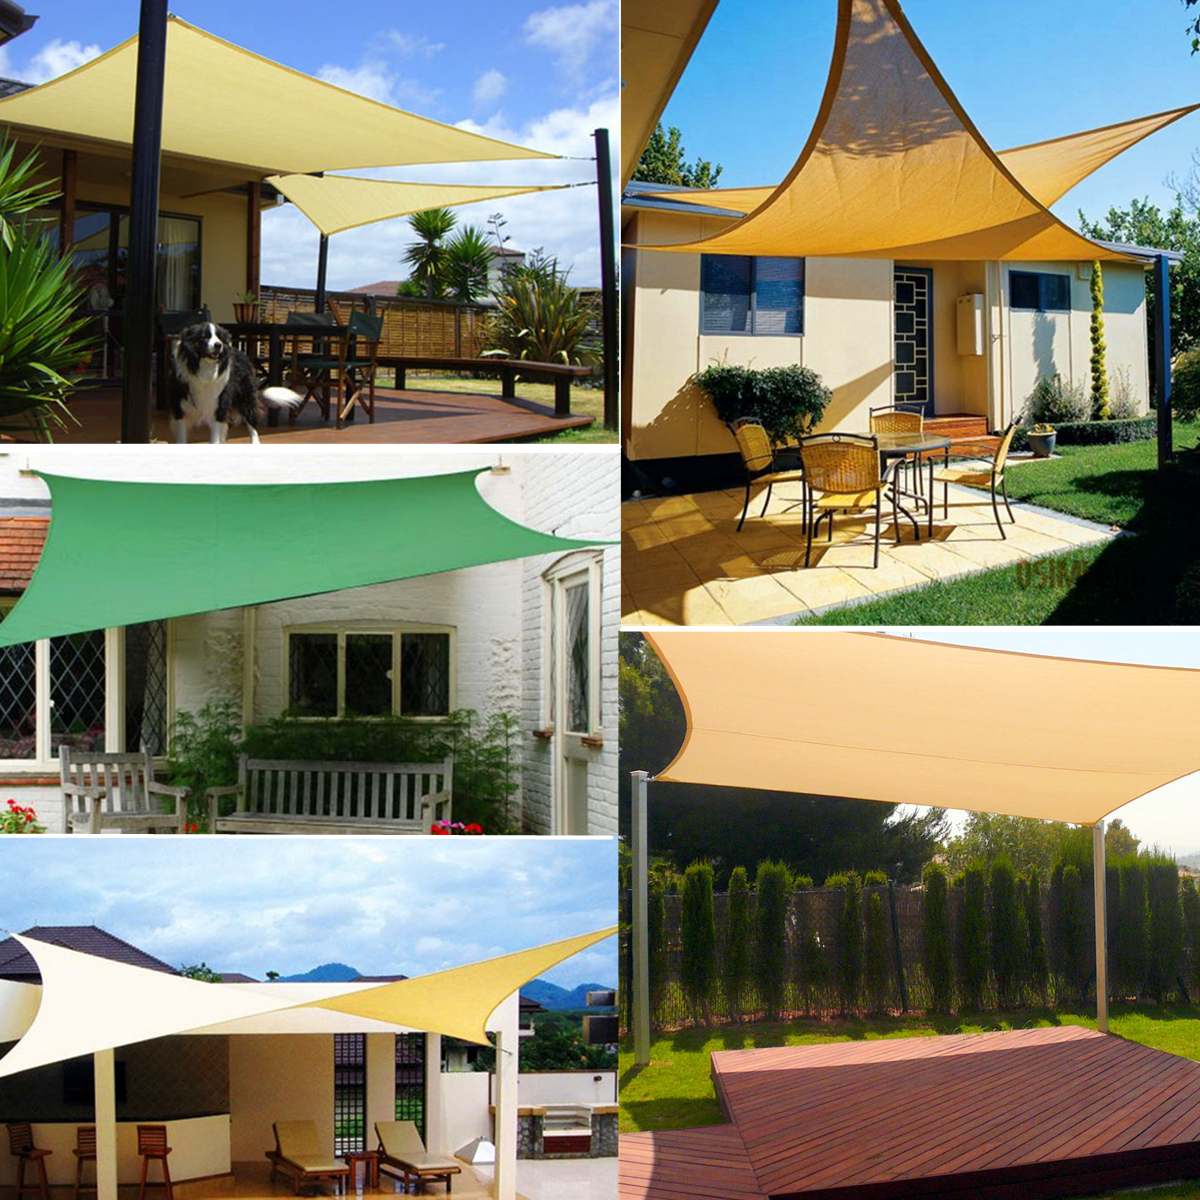 36x36x36m-Sunshade-Sail-Triangle-Fabric-Cover-Cloth-for-Patio-Canopy-Garden-1192675-4